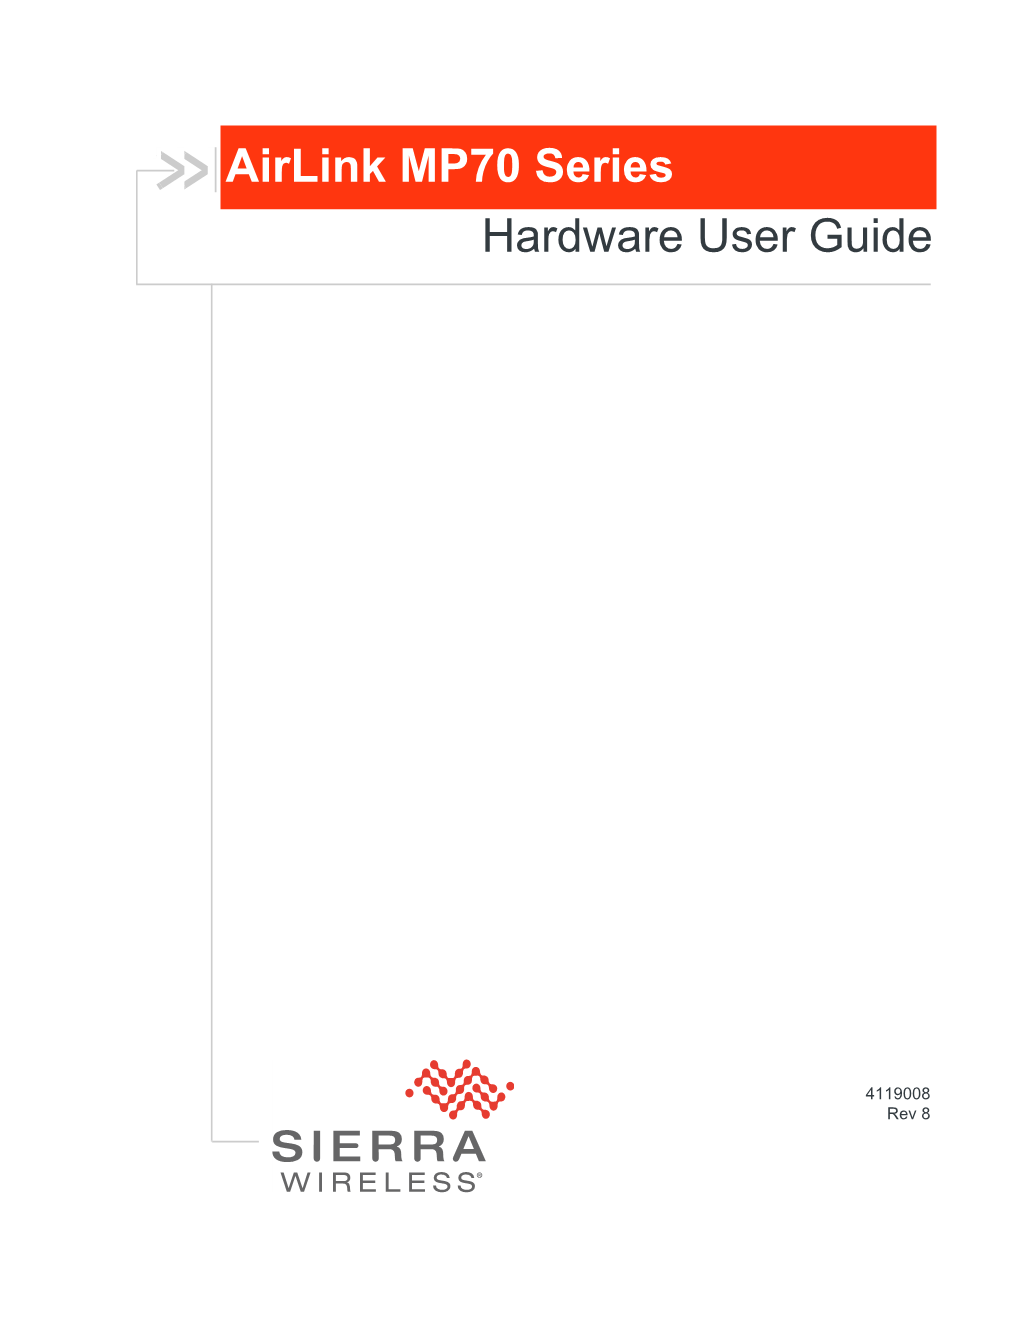 Airlink MP70 Series Hardware User Guide R8